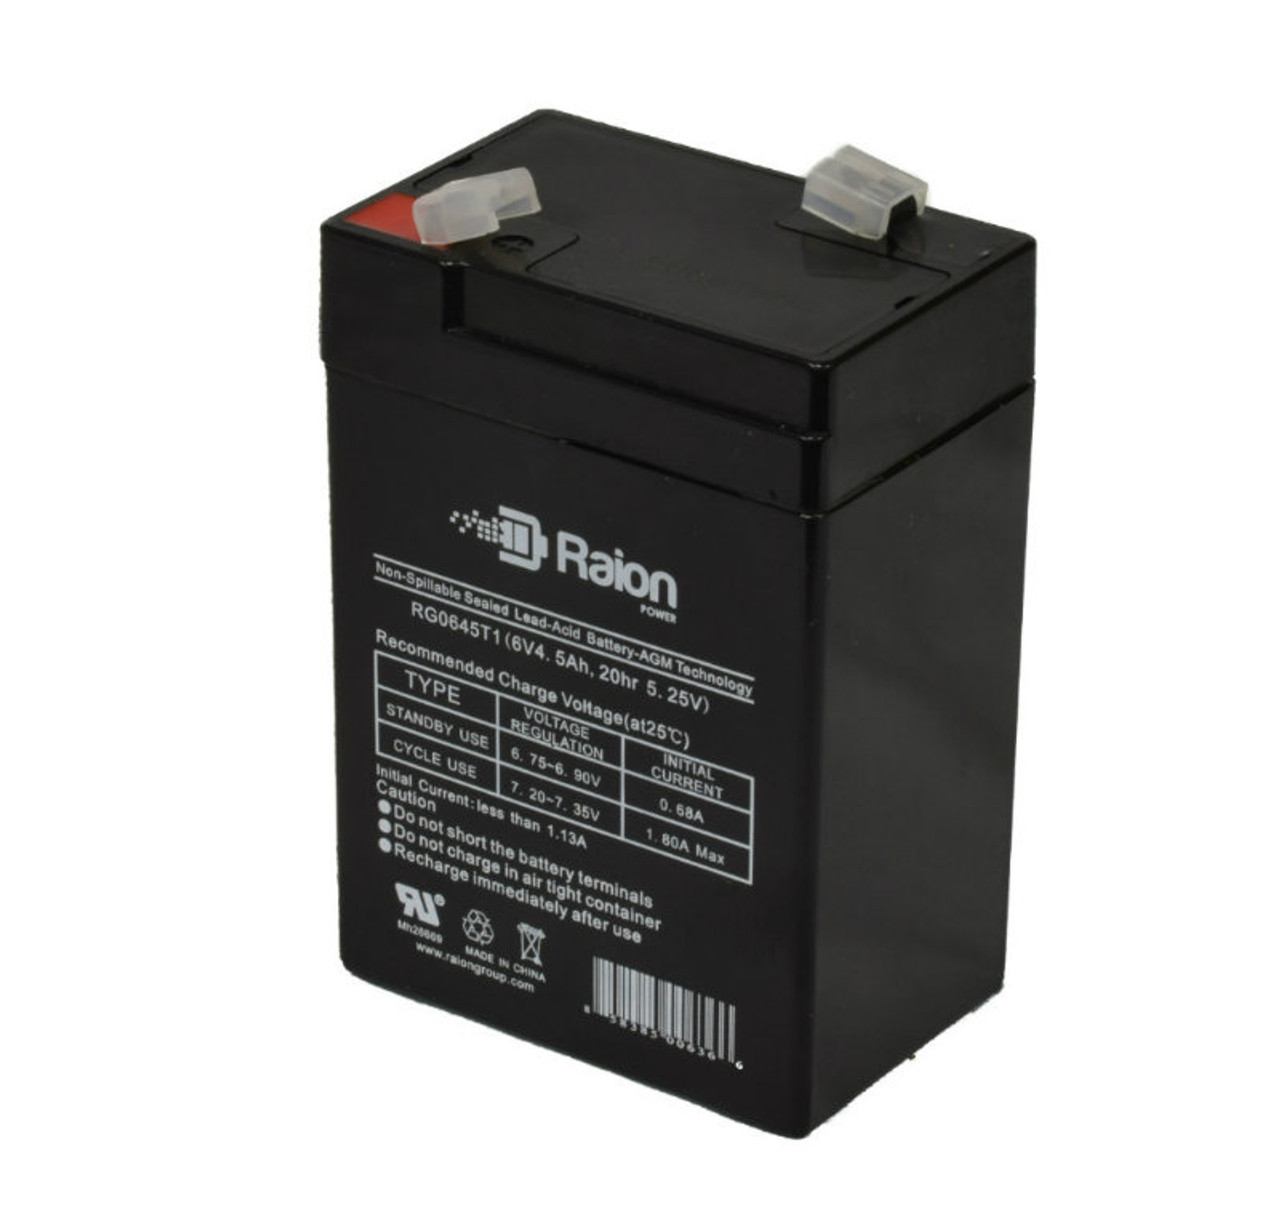 Raion Power RG0645T1 6V 4.5Ah Replacement Battery Cartridge for Light Alarms 8600016